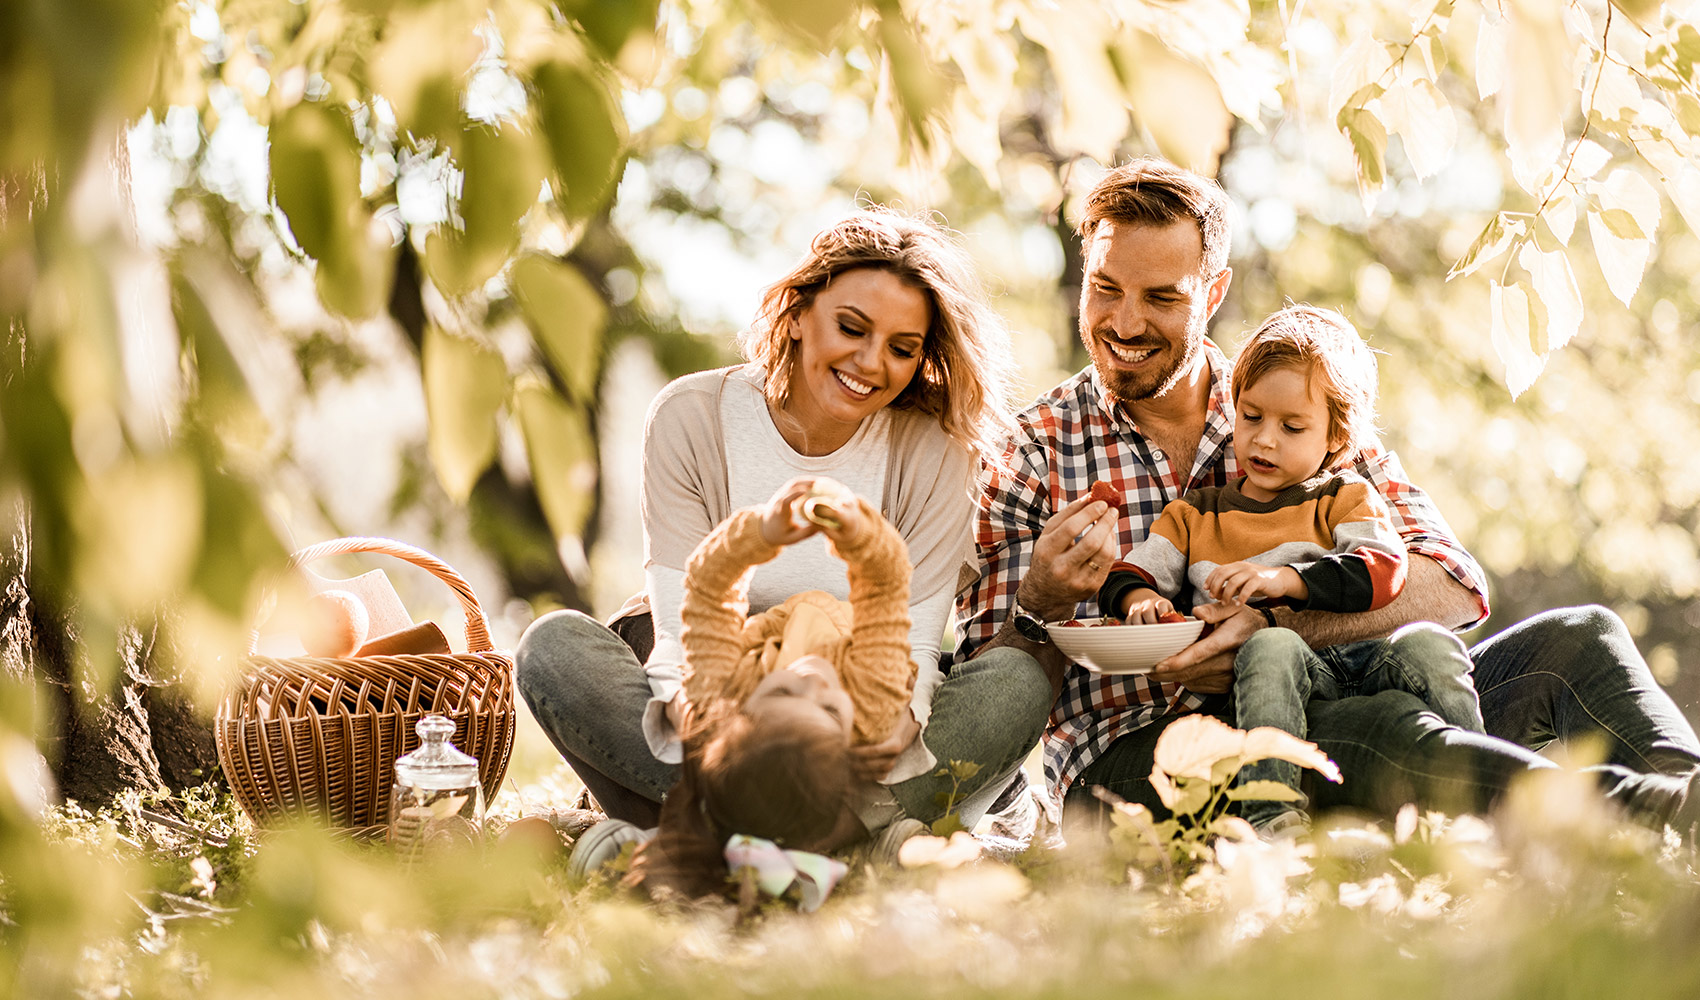 Image of a young family of four on a picnic